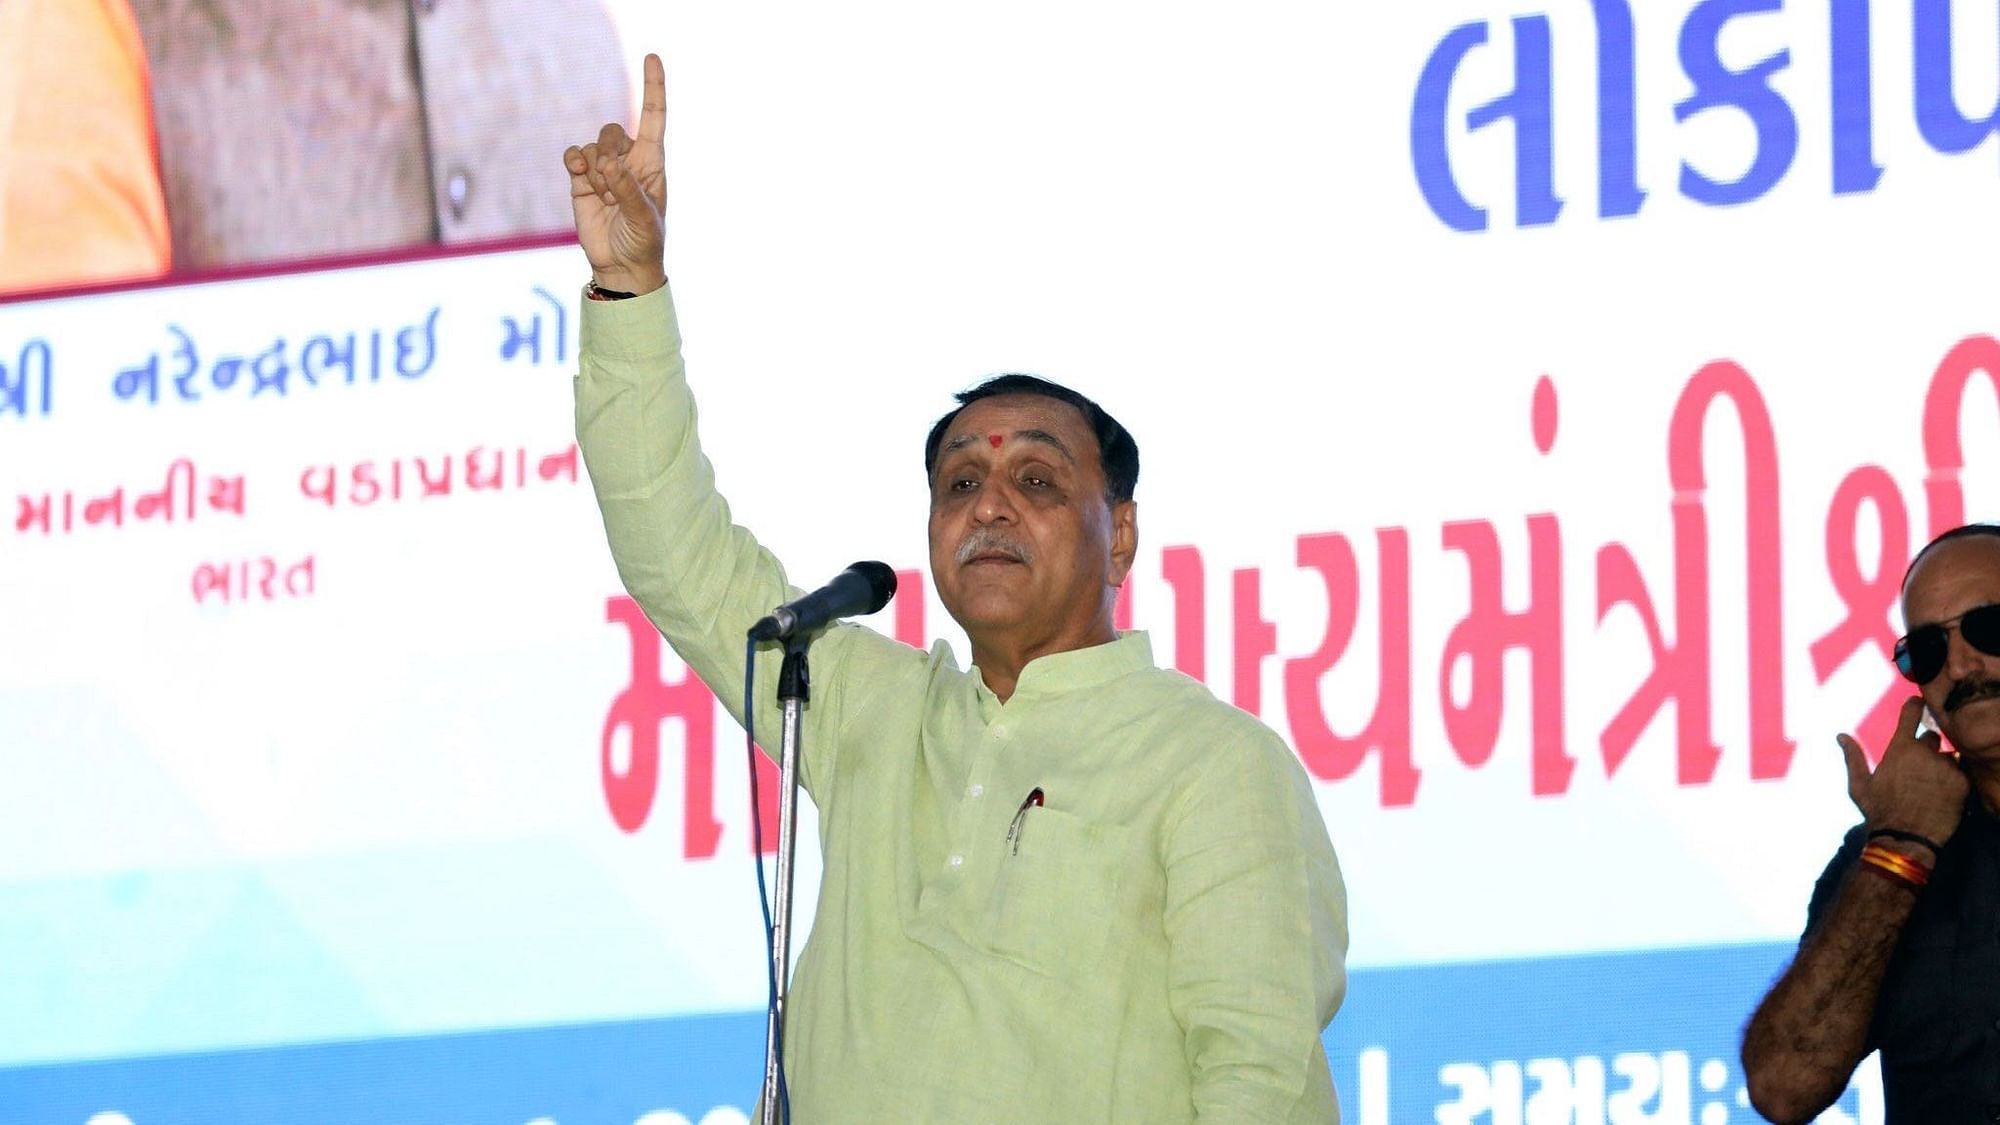 Vijay Rupani also said that his government will give “special” approvals for the construction of iconic skyscrapers in the four large cities of Gujarat